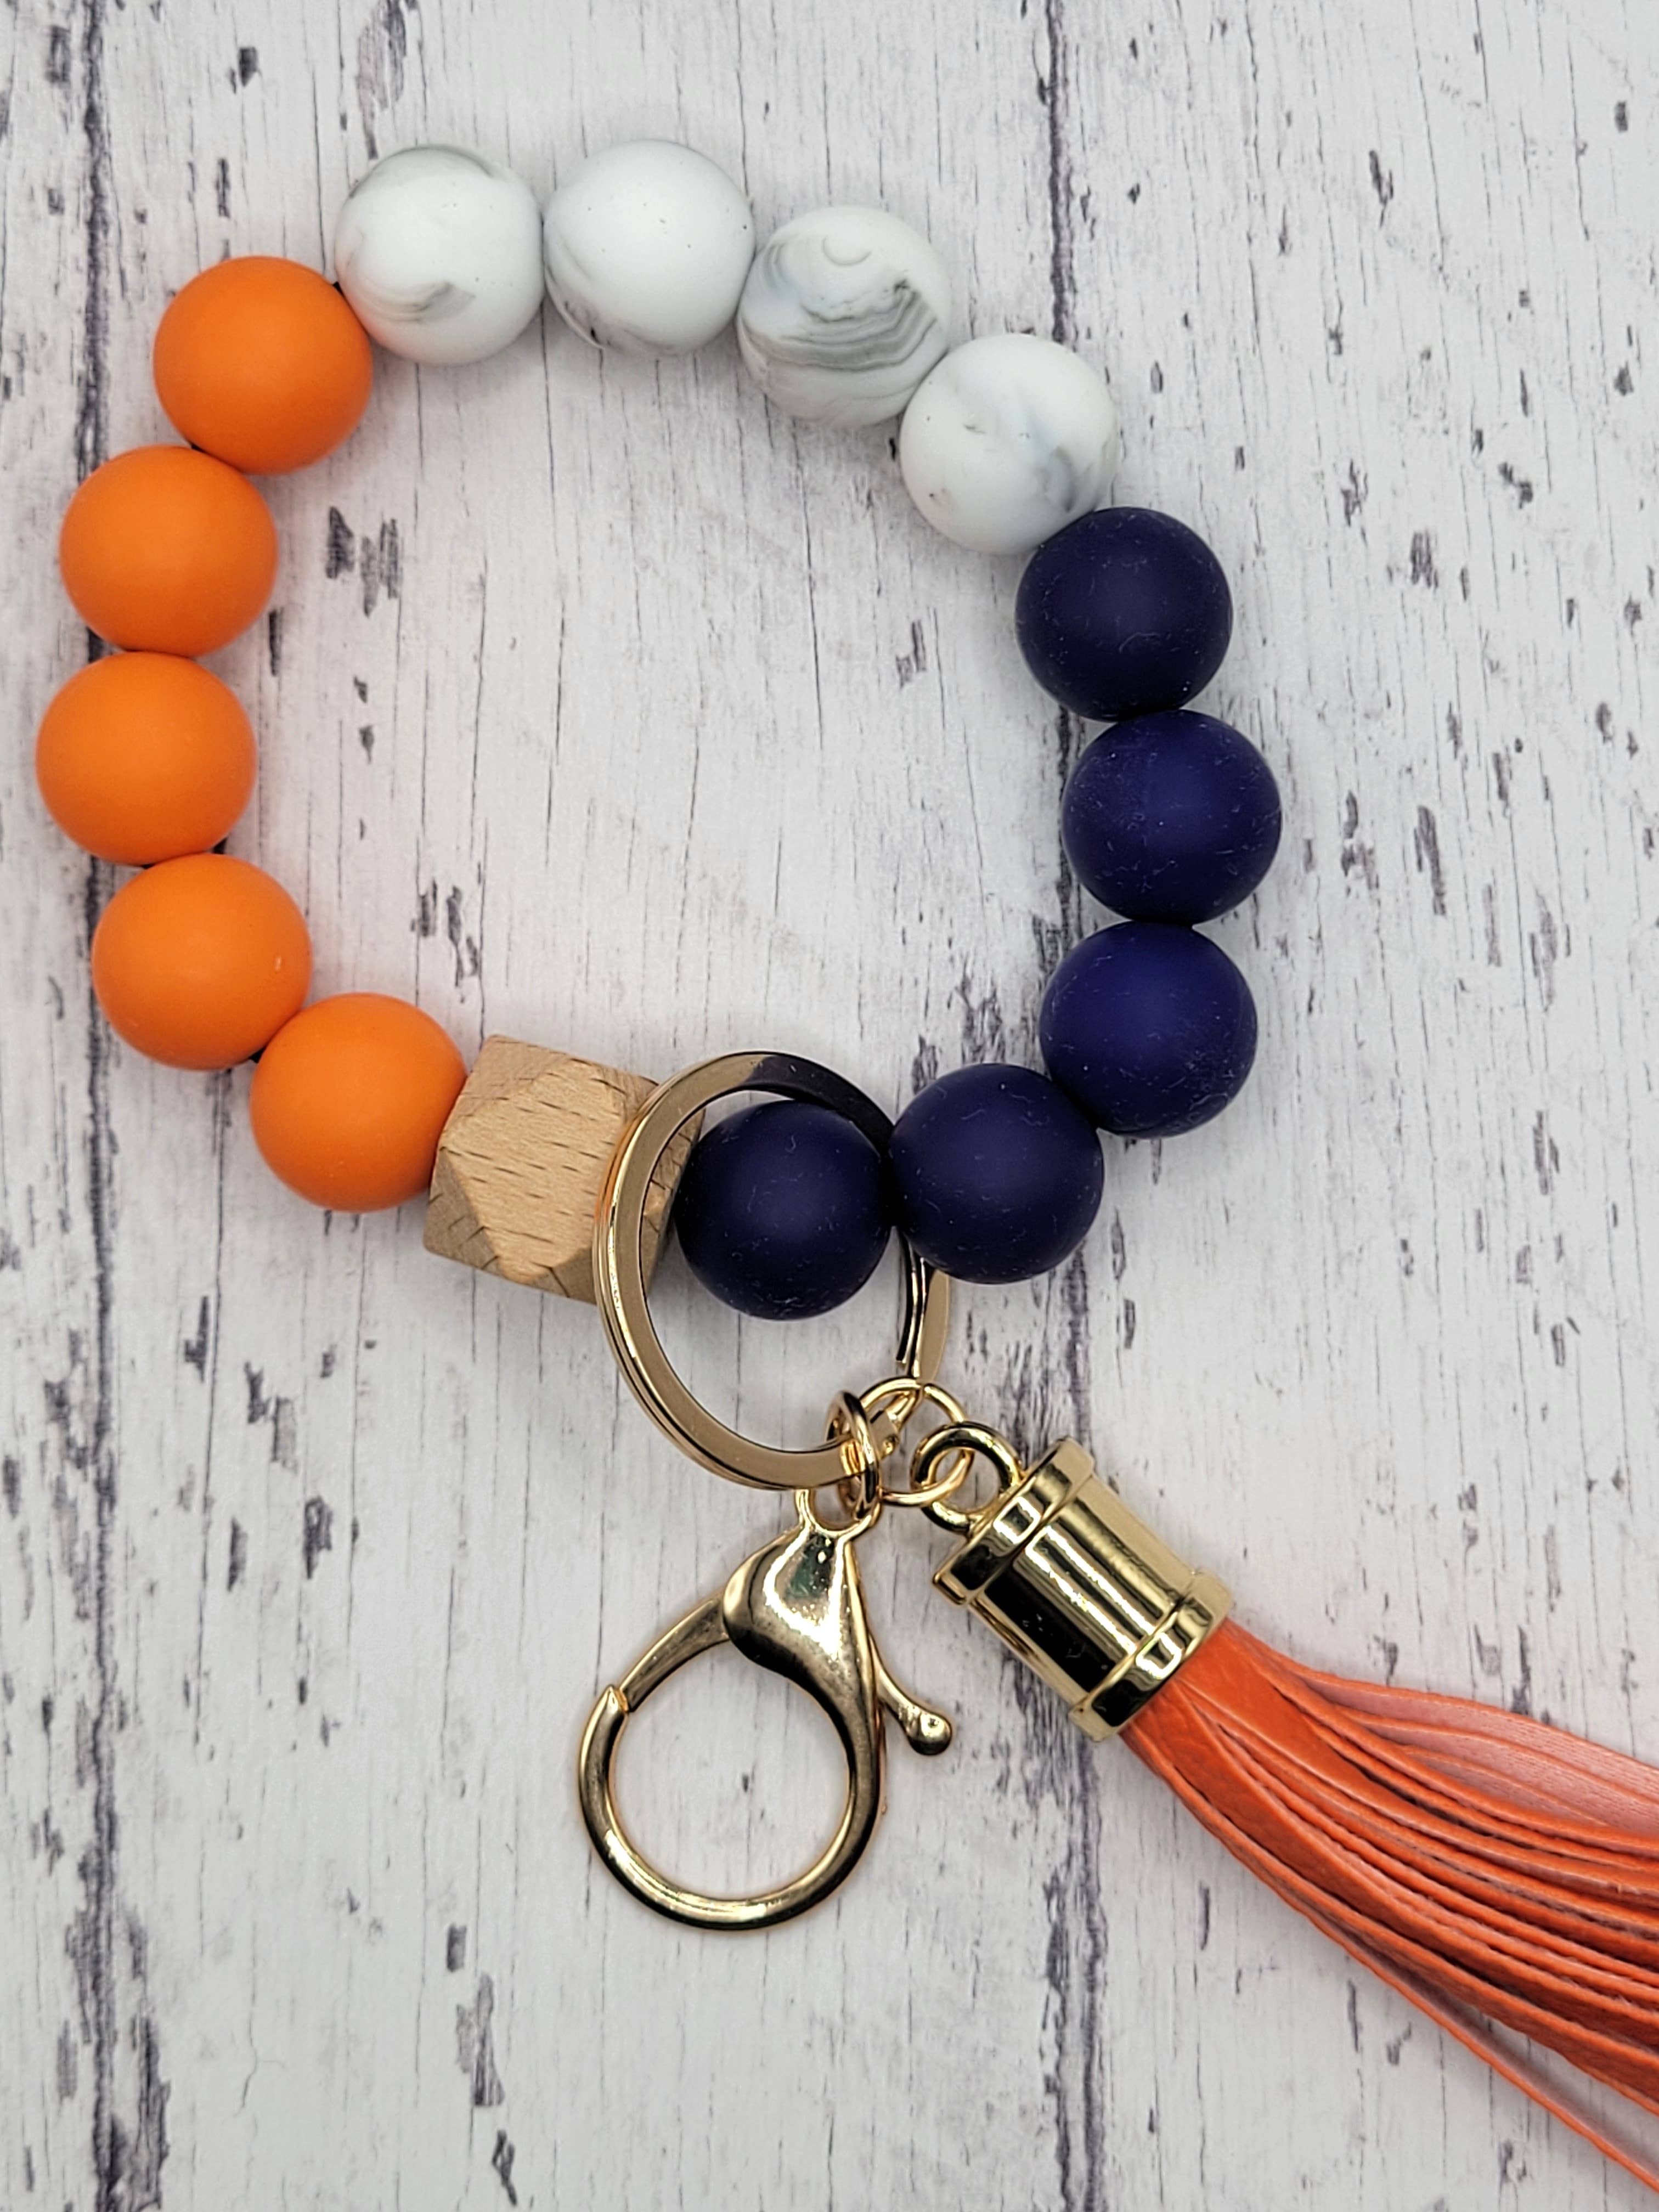 Silicone Bead Wristlet Keychain for Your Keys in a Beach Theme Can